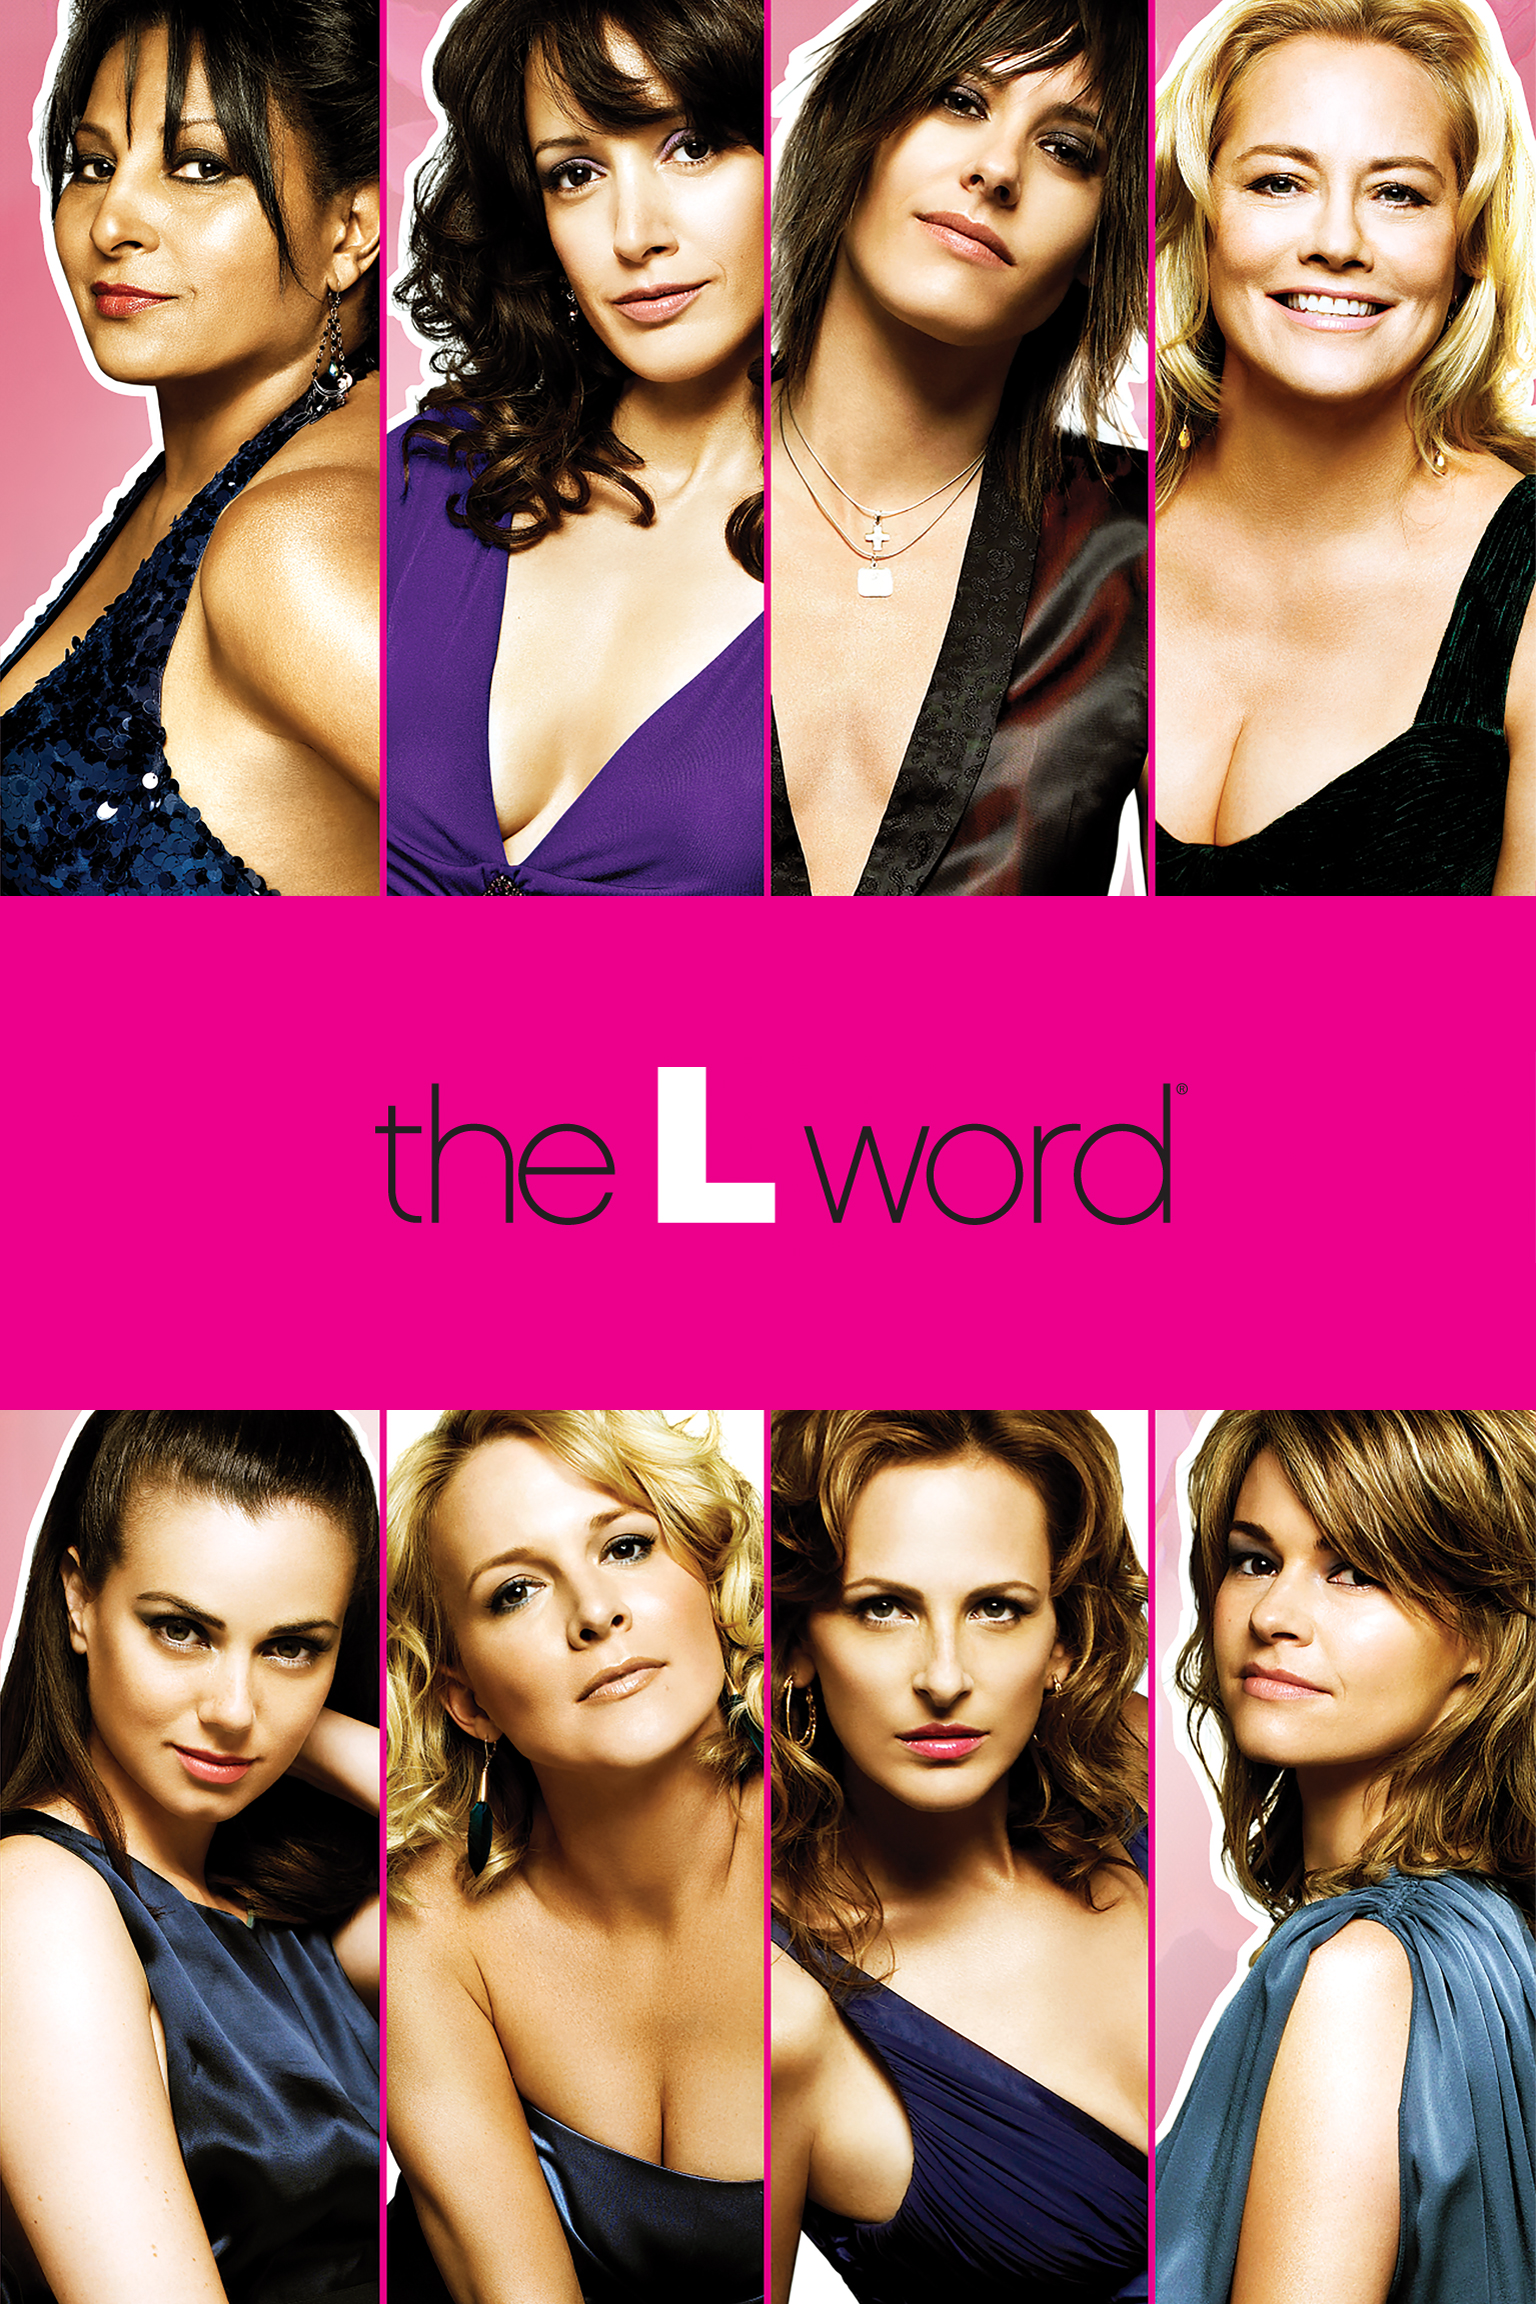 channa weerasinghe recommends L Word Episode 1